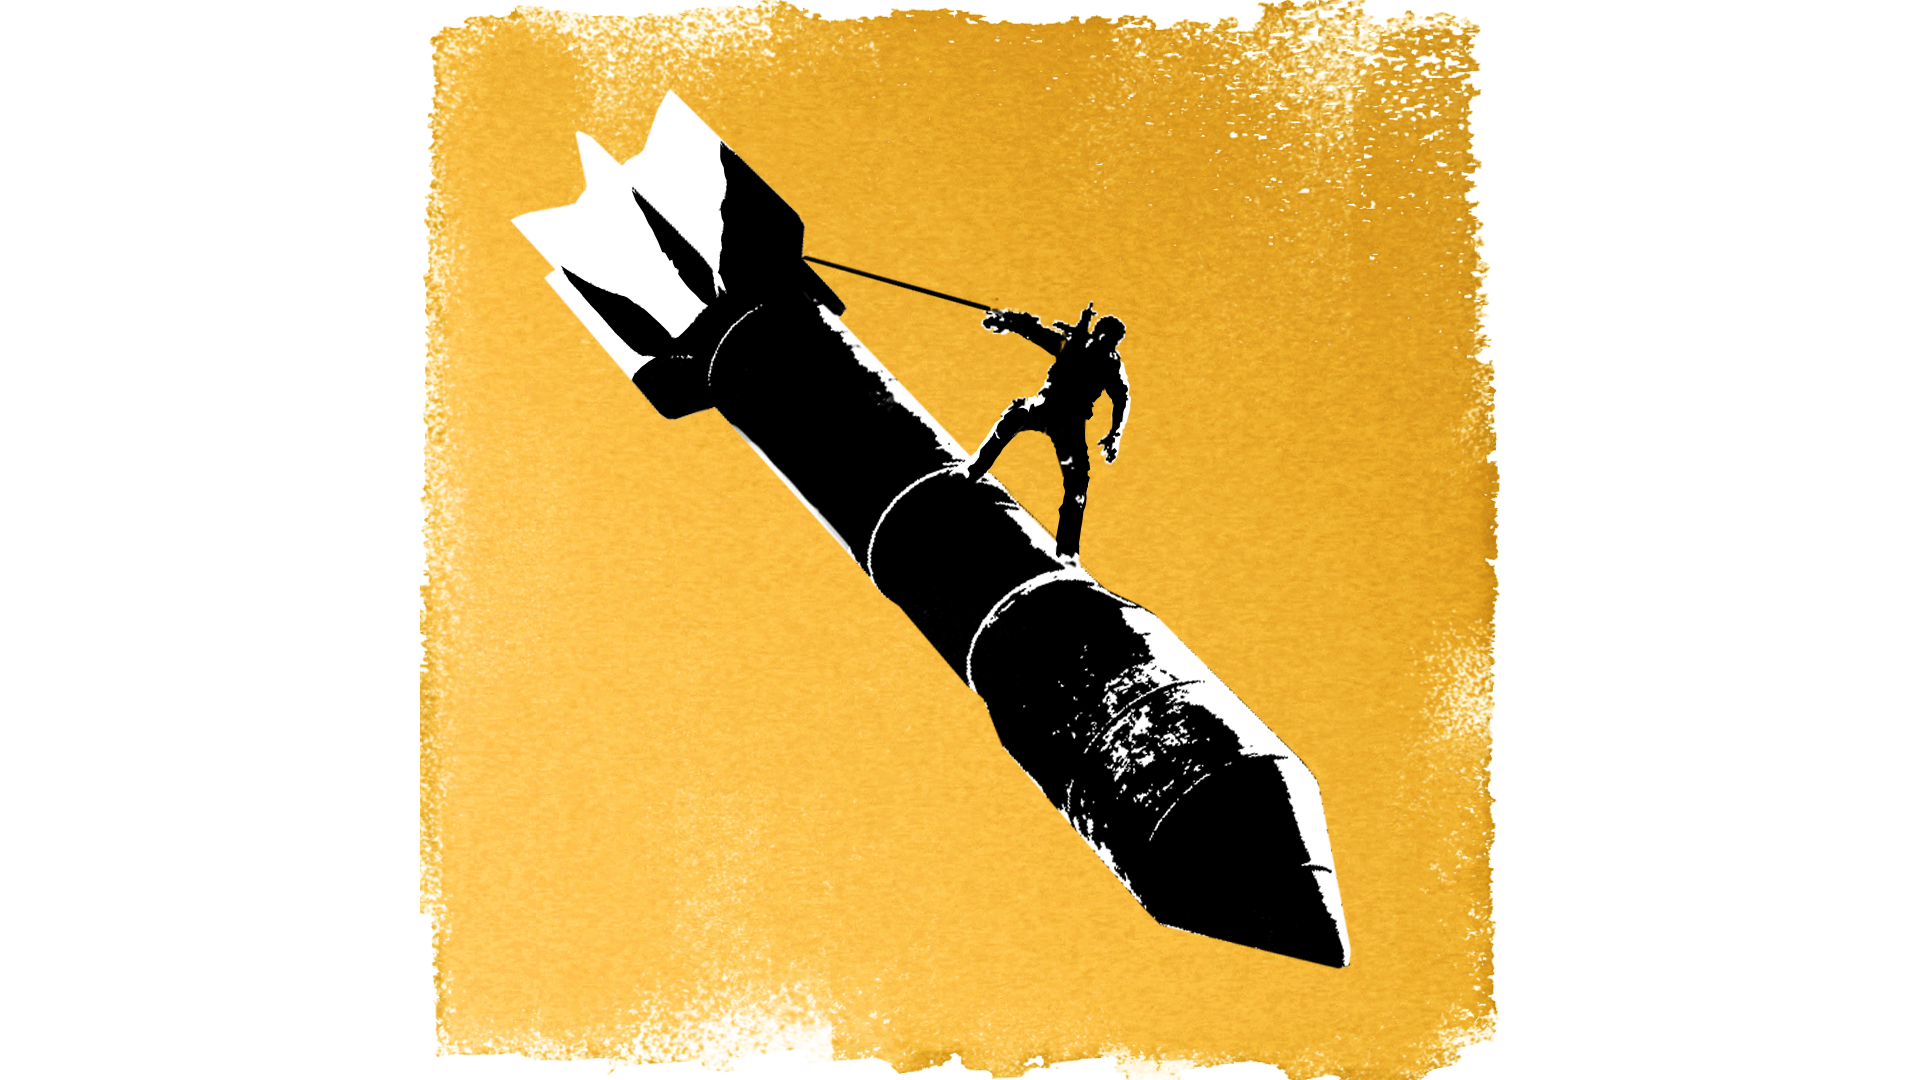 Icon for F!#& YOU, MISSILE